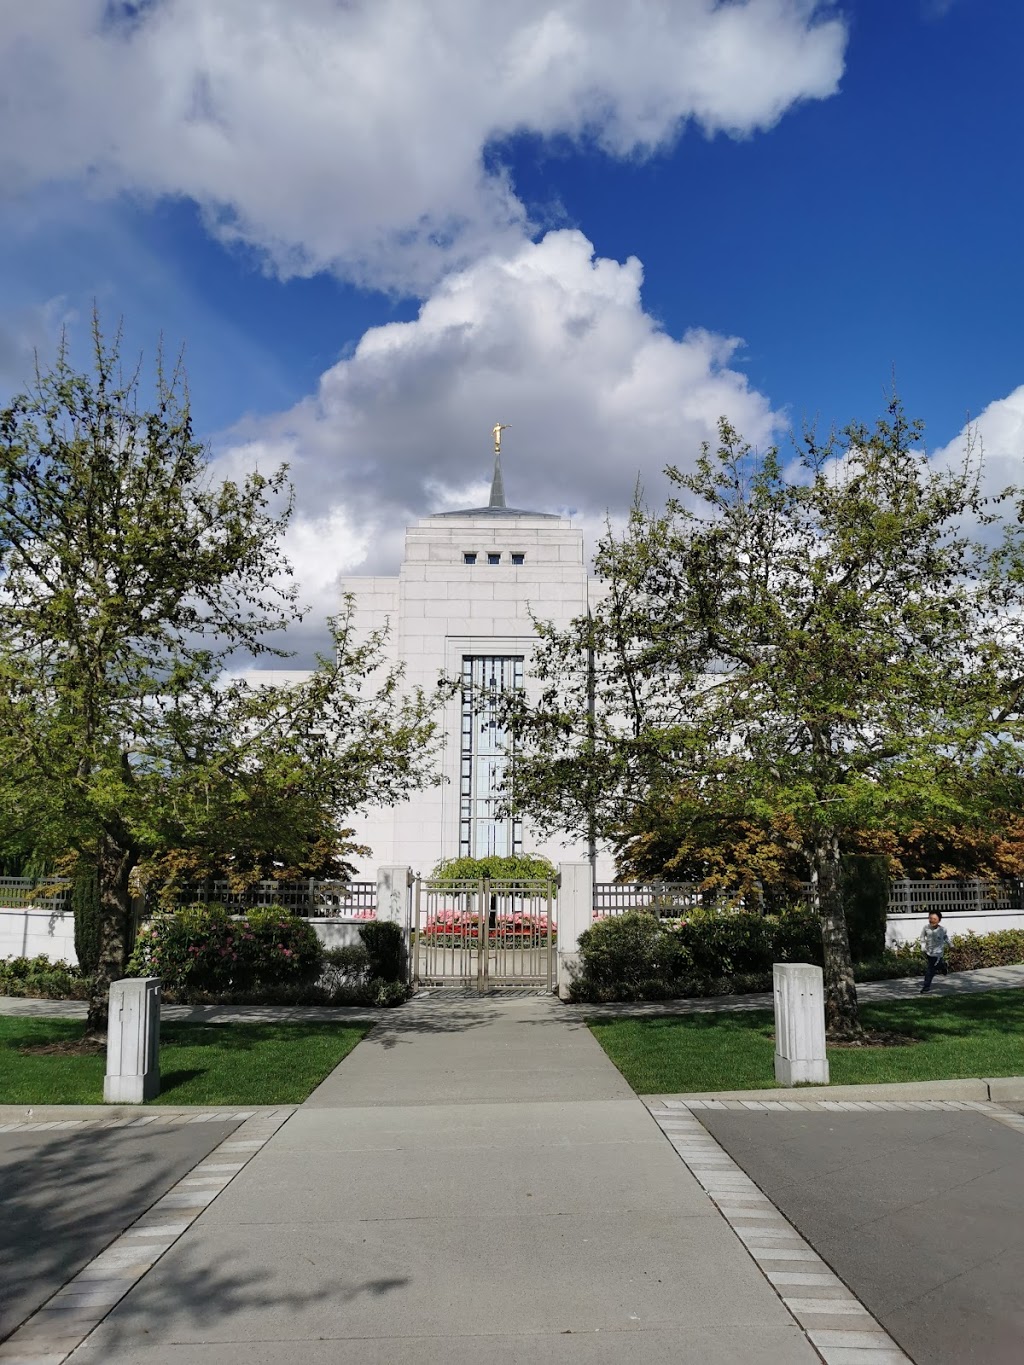 Vancouver British Columbia Temple | church | 2A9, 20370 82 Ave, Langley City, BC V2Y 2B2, Canada | 6045135933 OR +1 604-513-5933